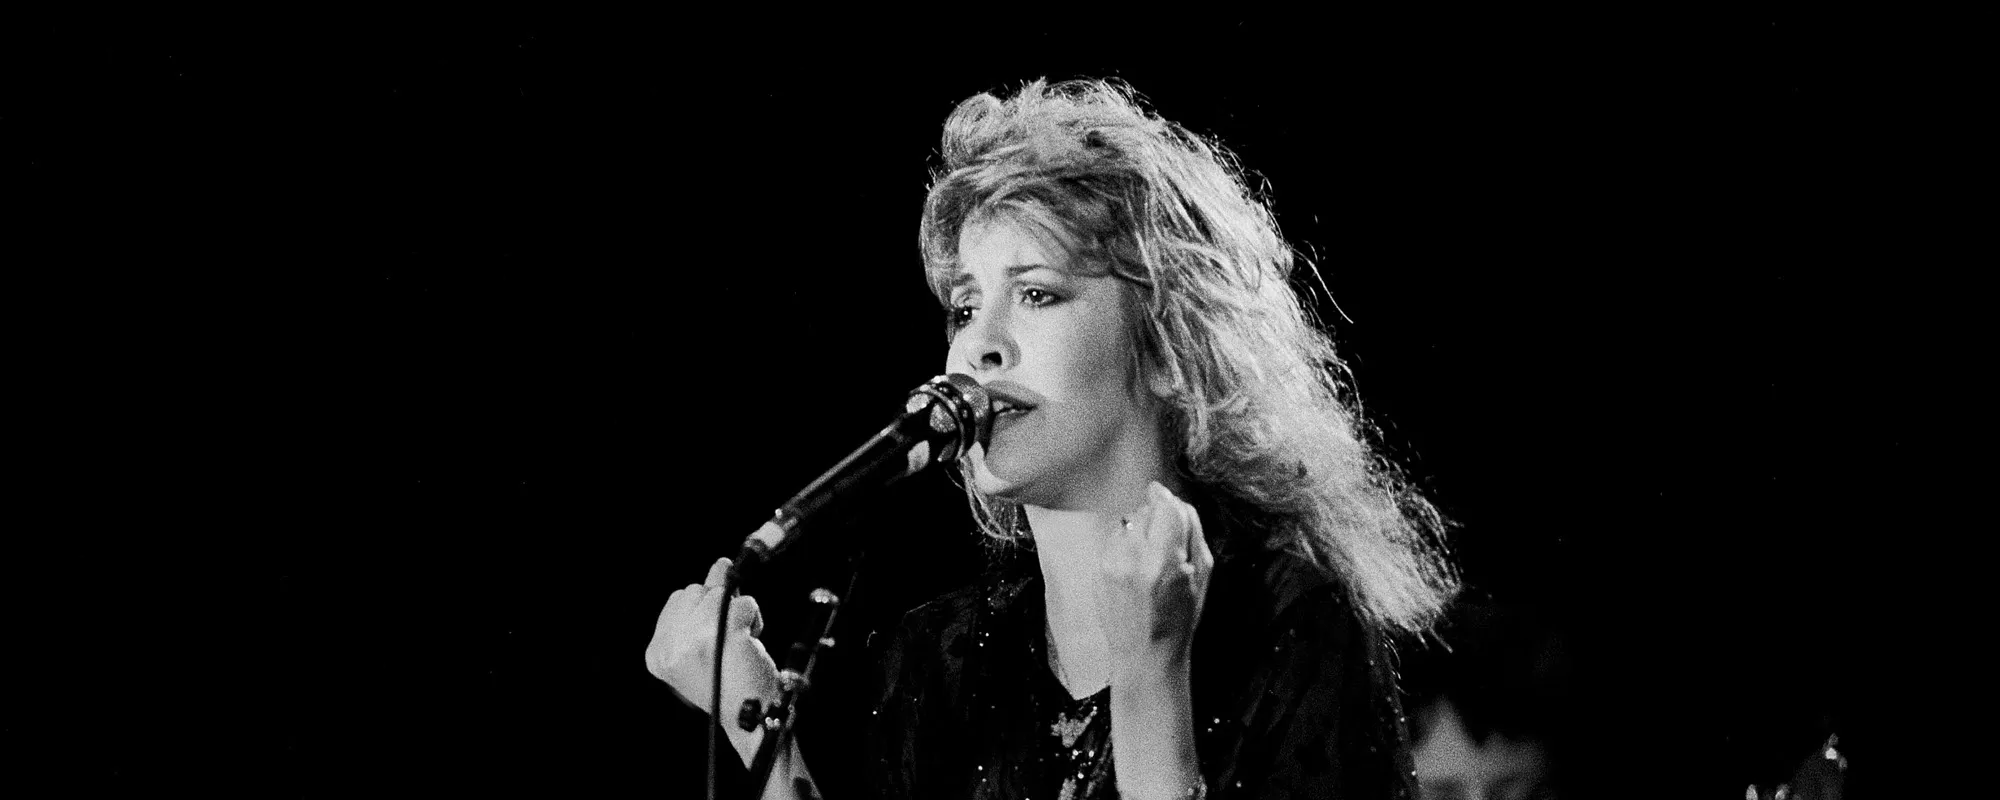 The Meaning Behind “Bella Donna,” the Definitive Song That Sparked Stevie Nicks’ Solo Career